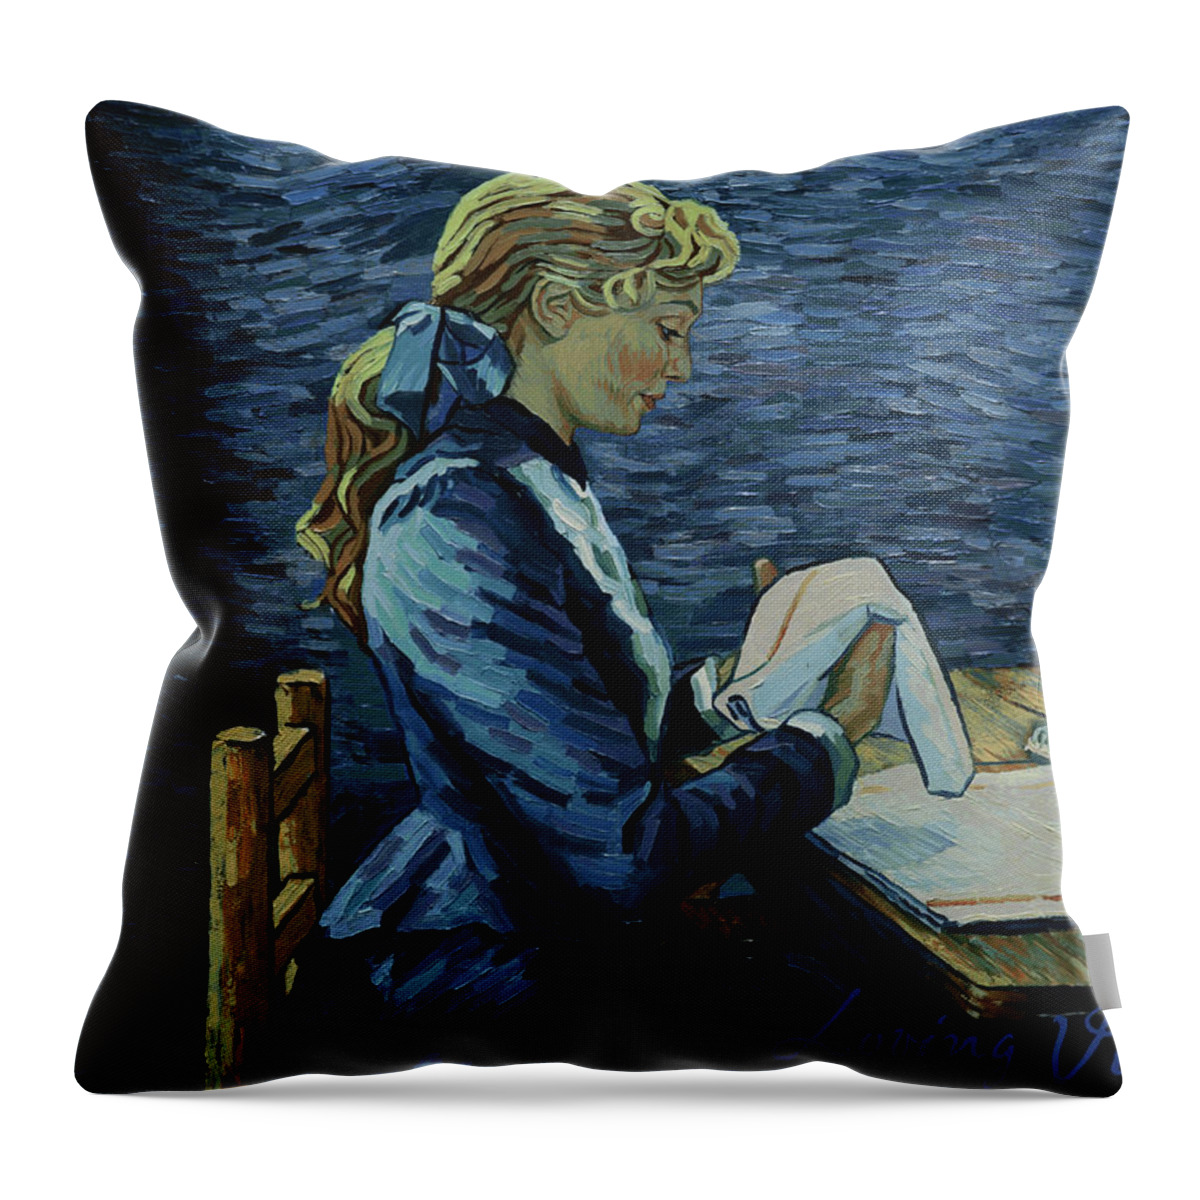  Throw Pillow featuring the painting You Looking for Something? by Maryna Savchenko